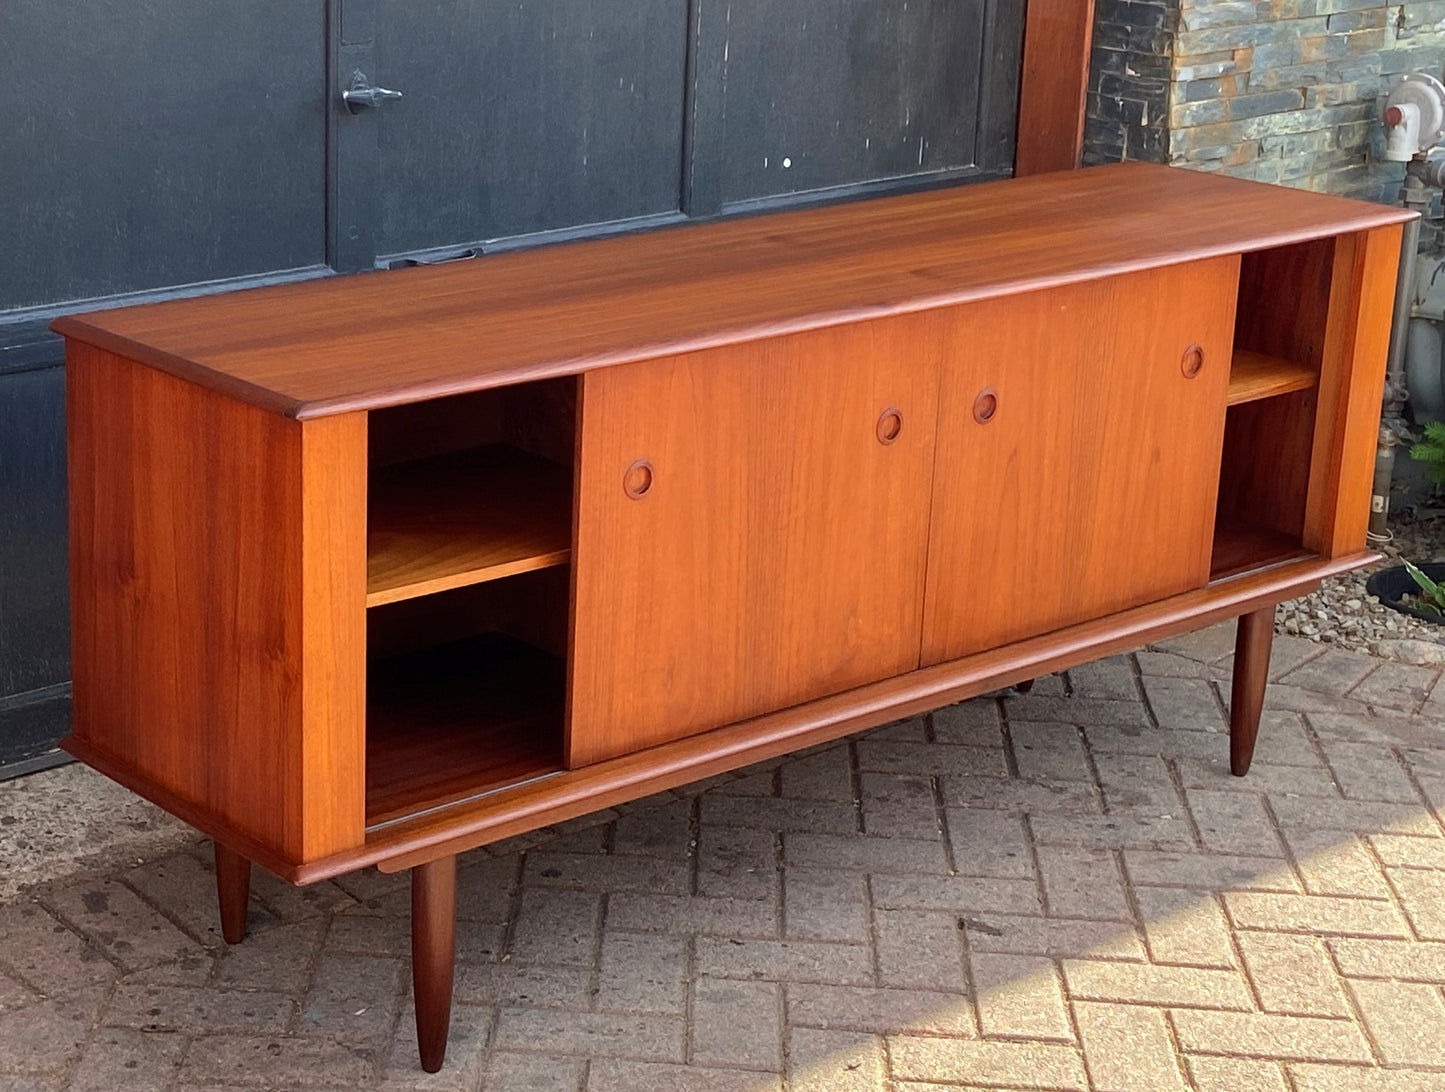 REFINISHED Mid Century Modern Teak Sideboard by Punch Design 6ft